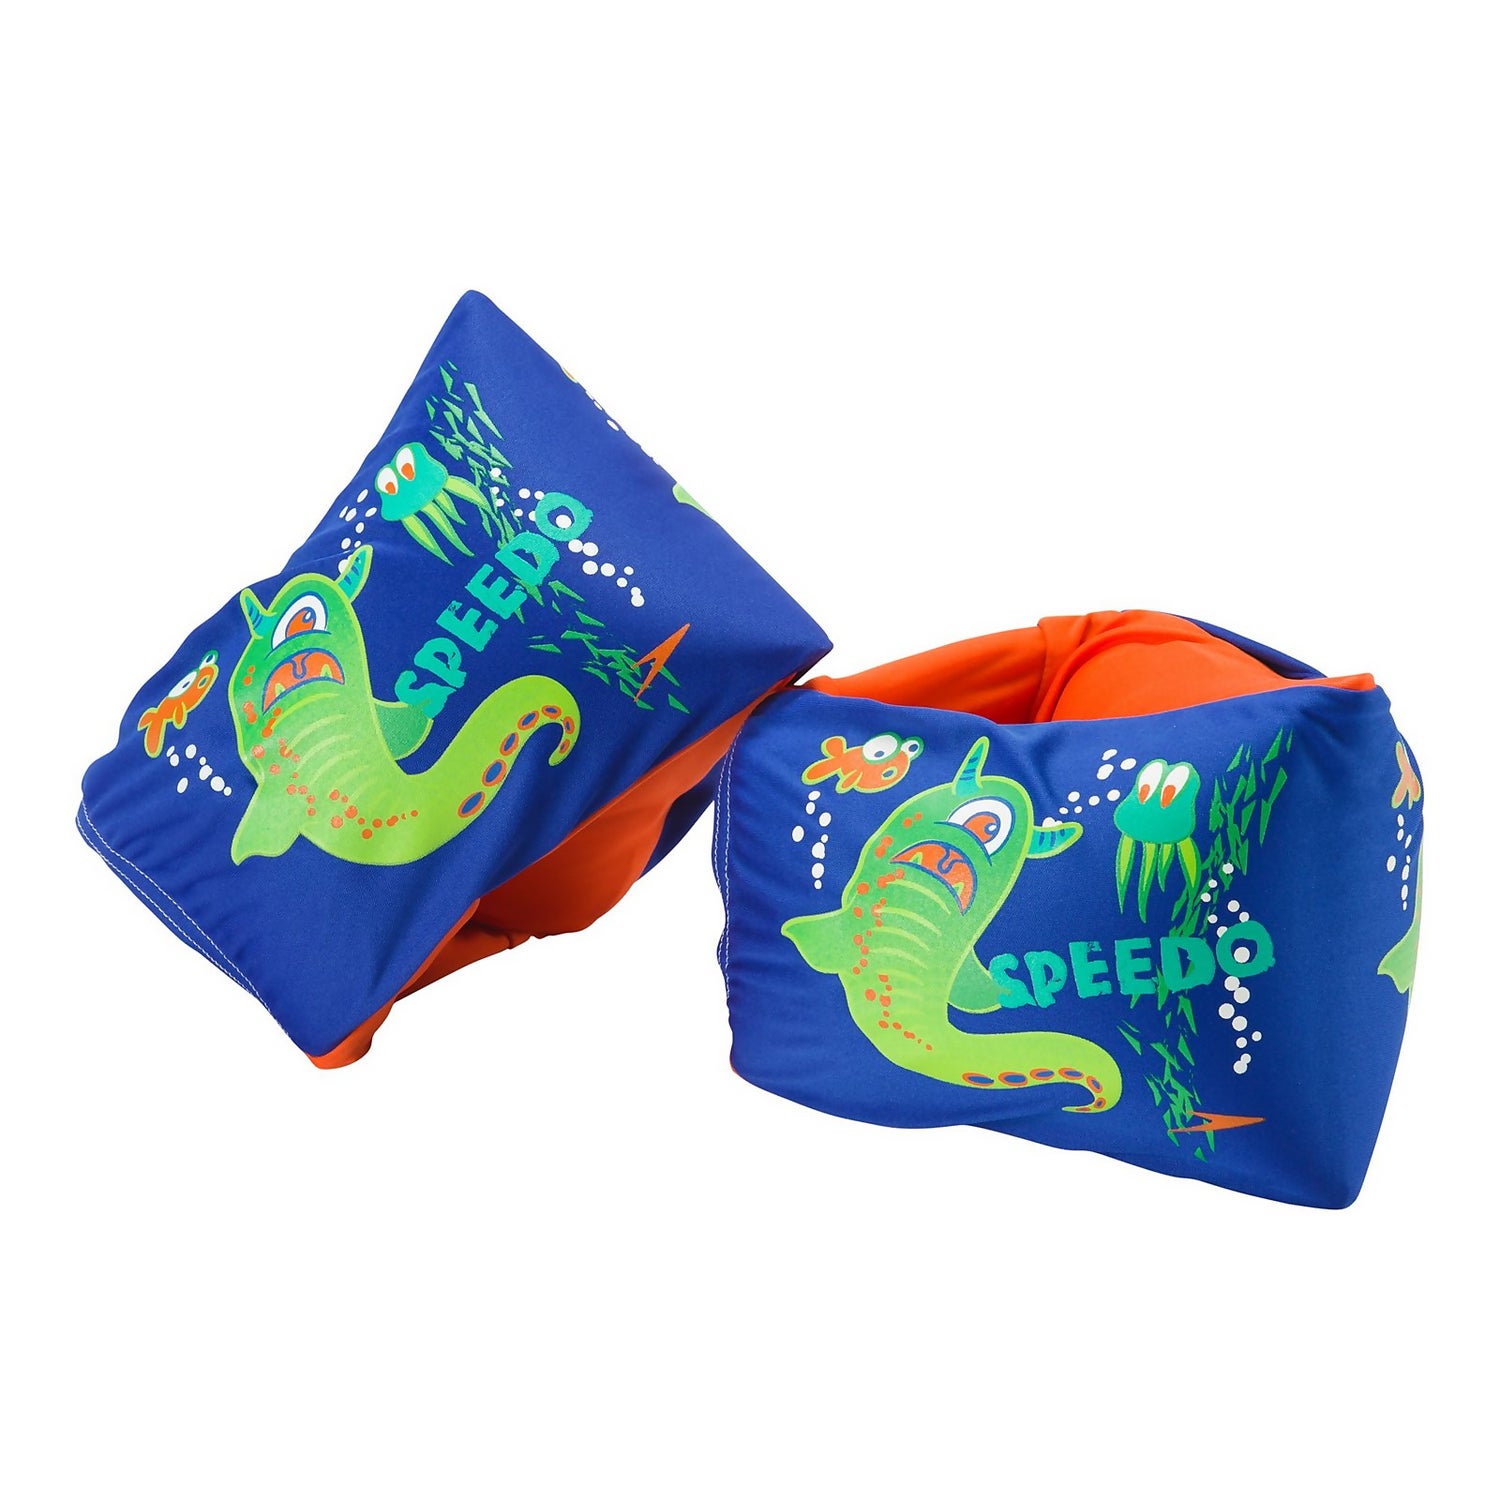 Speedo Kids Fabric Armbands Ages 2-12 Pool Floatation Device Water Training E1 for sale online 